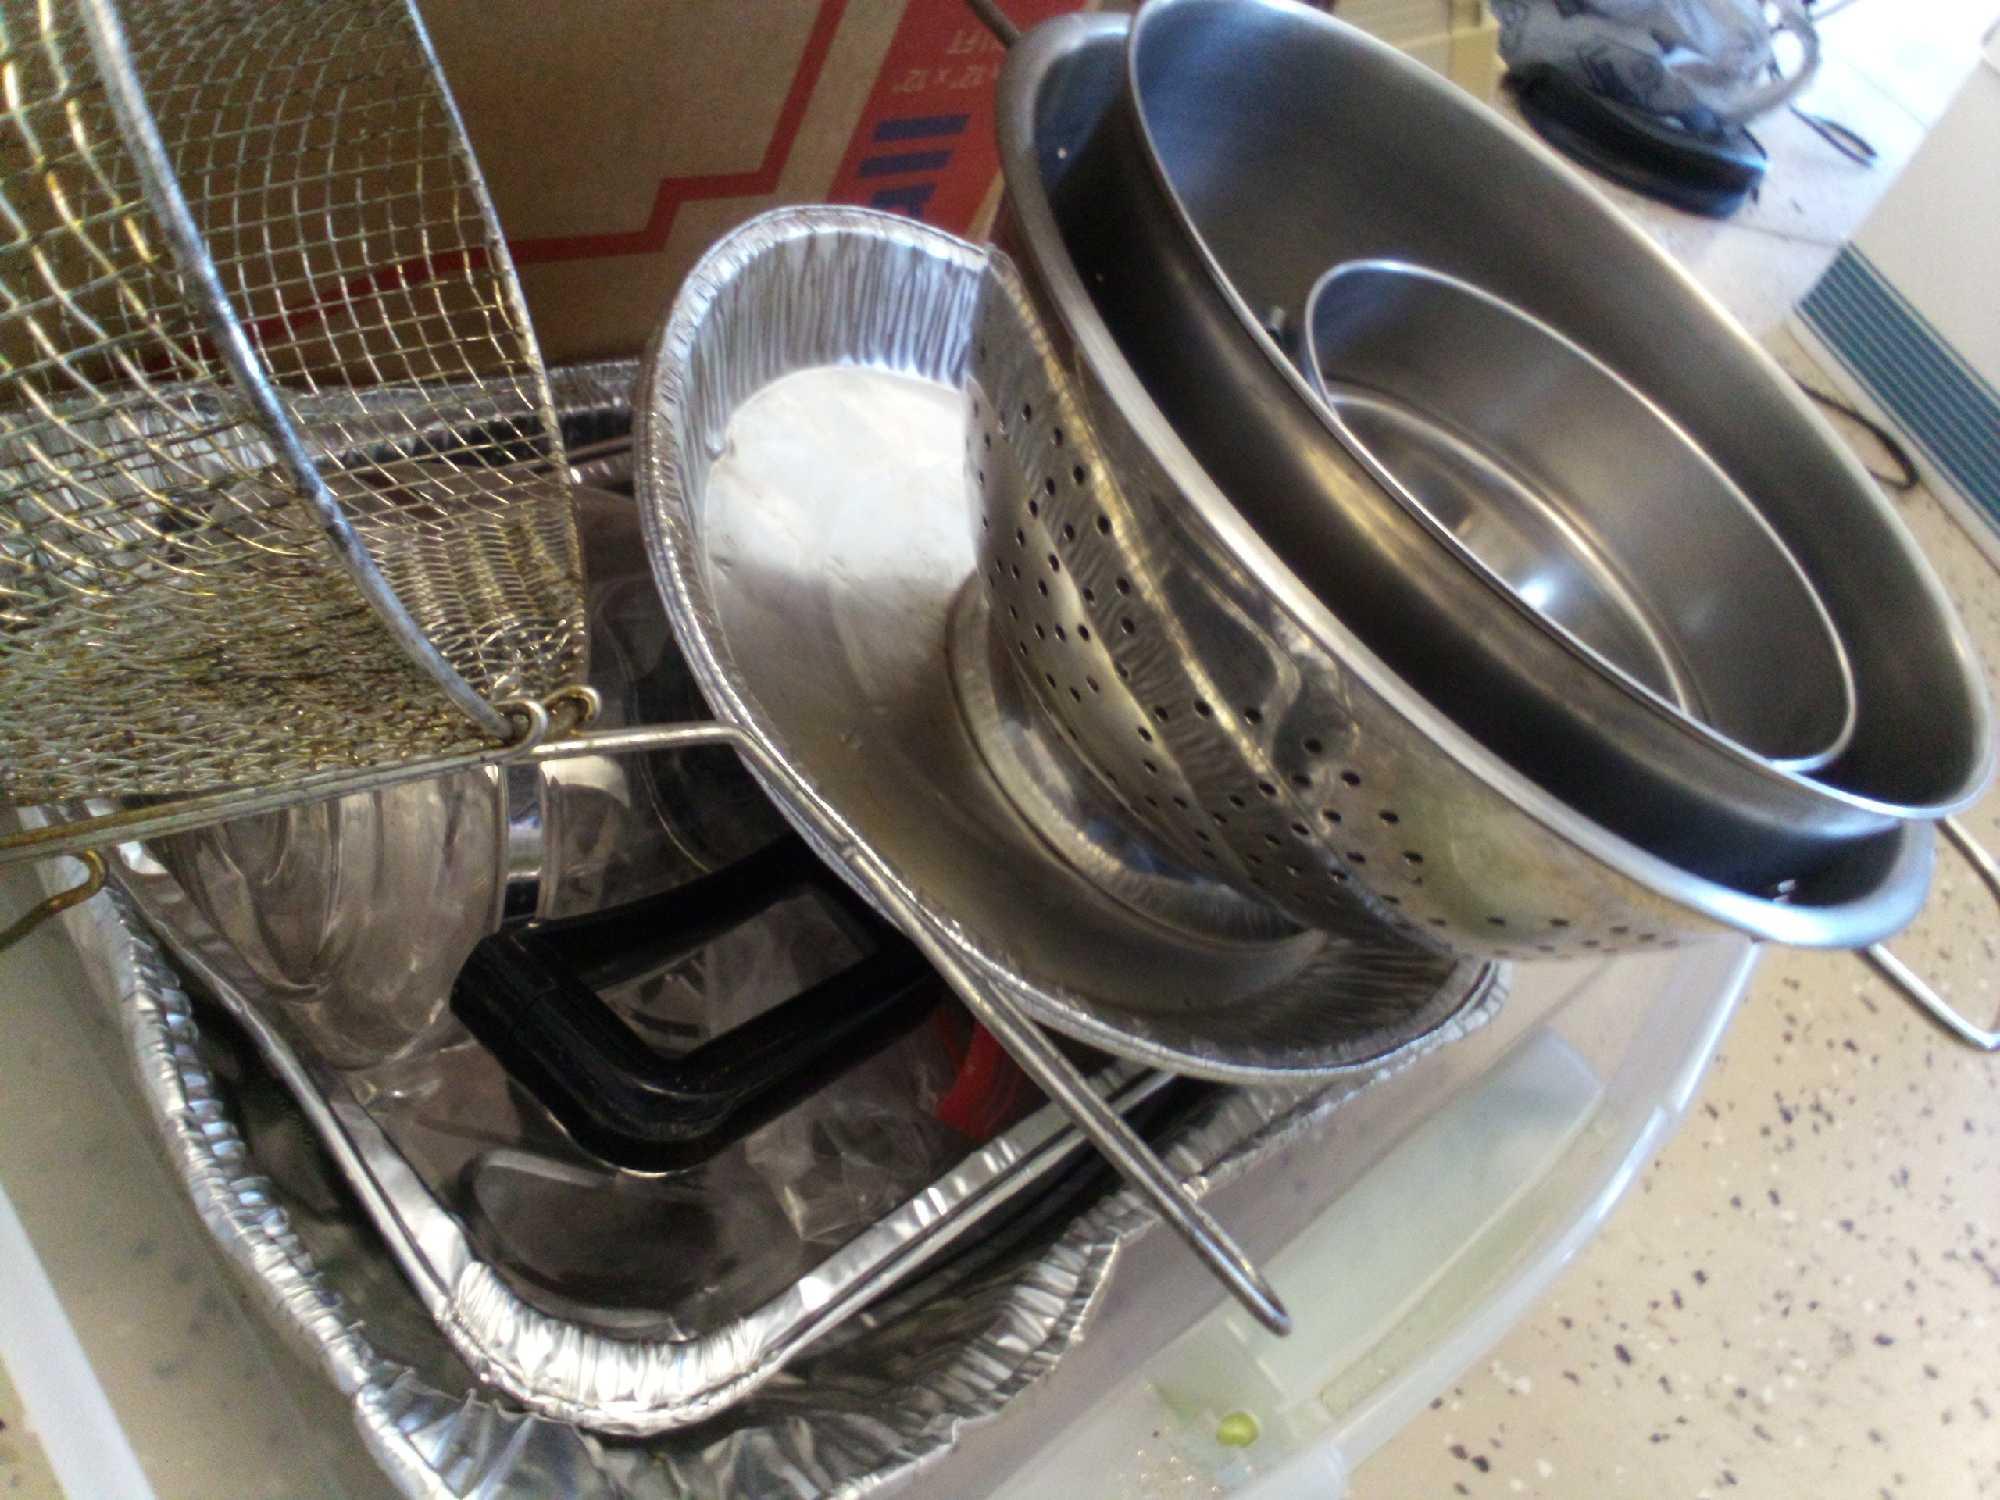 GROUP OF KITCHEN ITEMS INCLUDING STAINLESS STEEL BOWLS, COLANDER, TUPPERWARE AND MORE